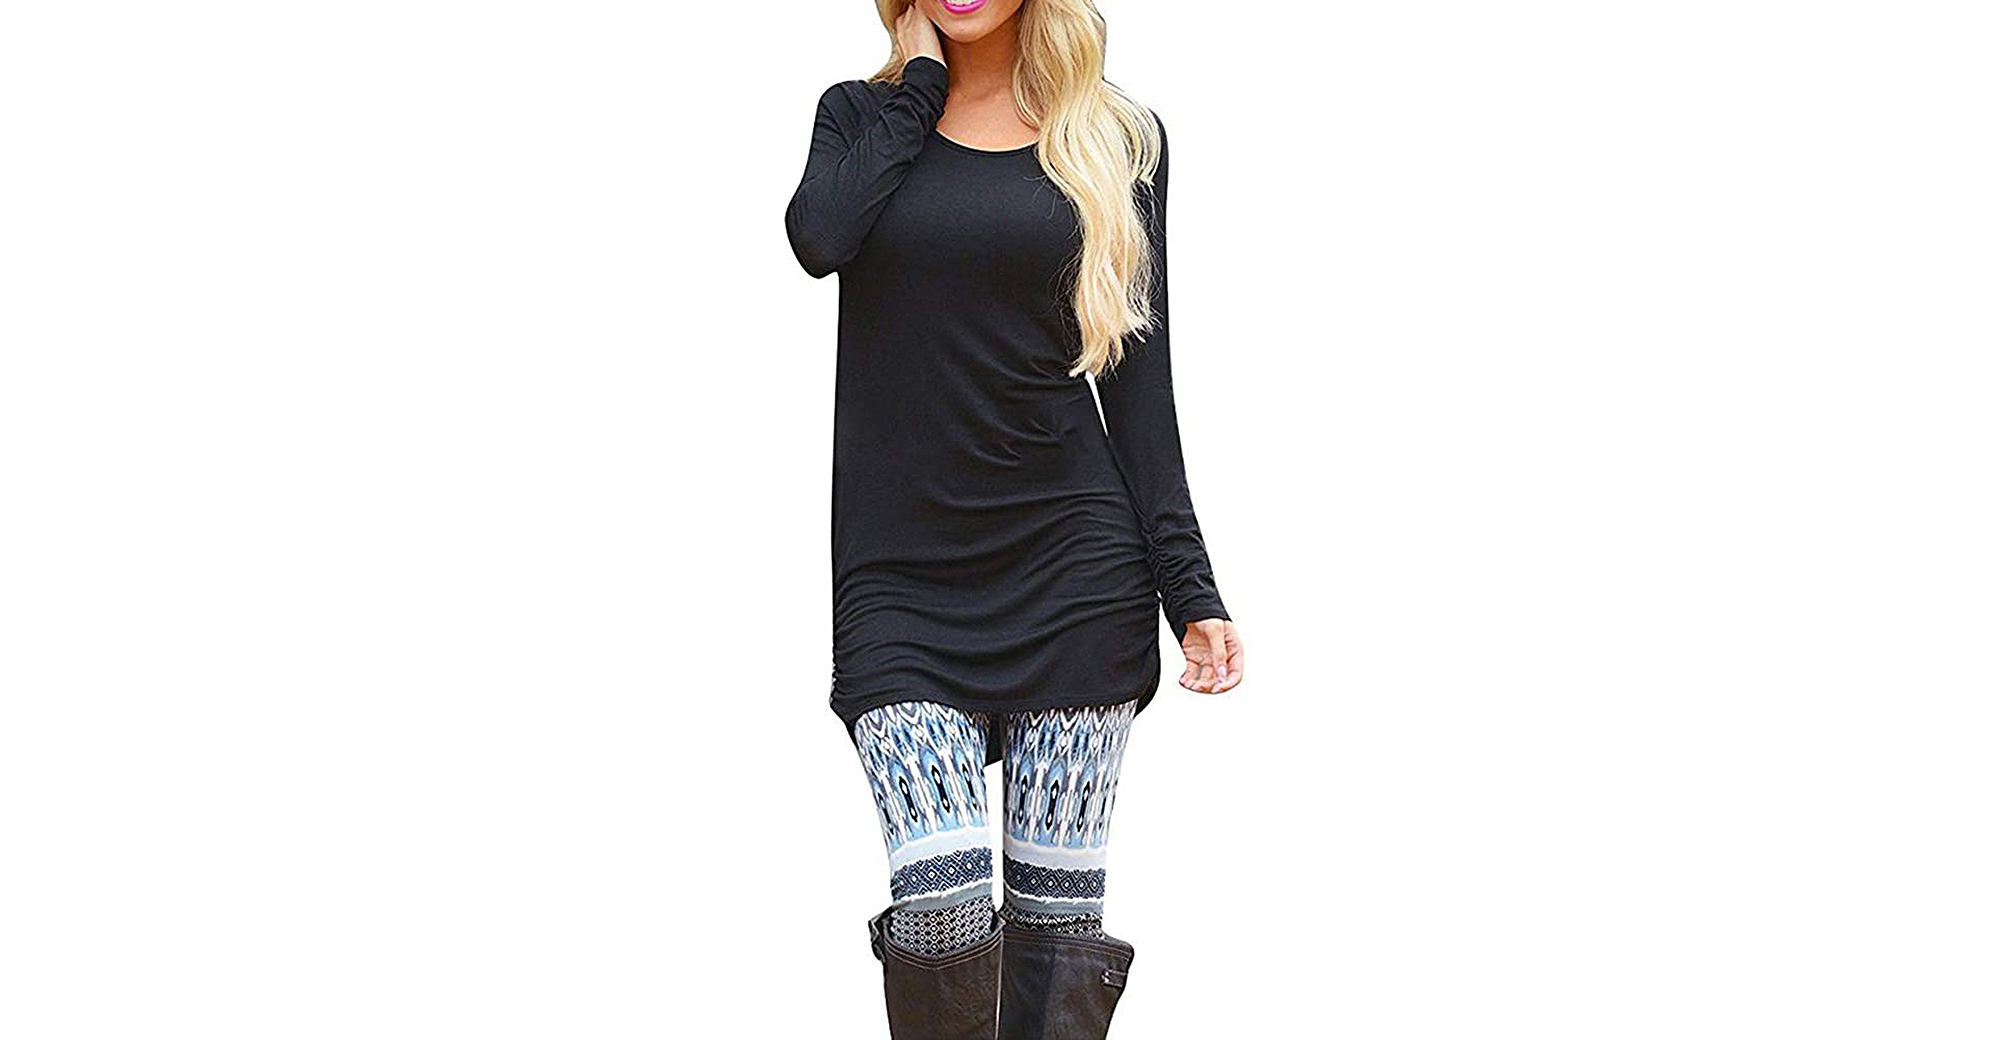 8 Best Tunic Tops For Leggings Reviewed 2019 - 2020 | MyCasualStyle